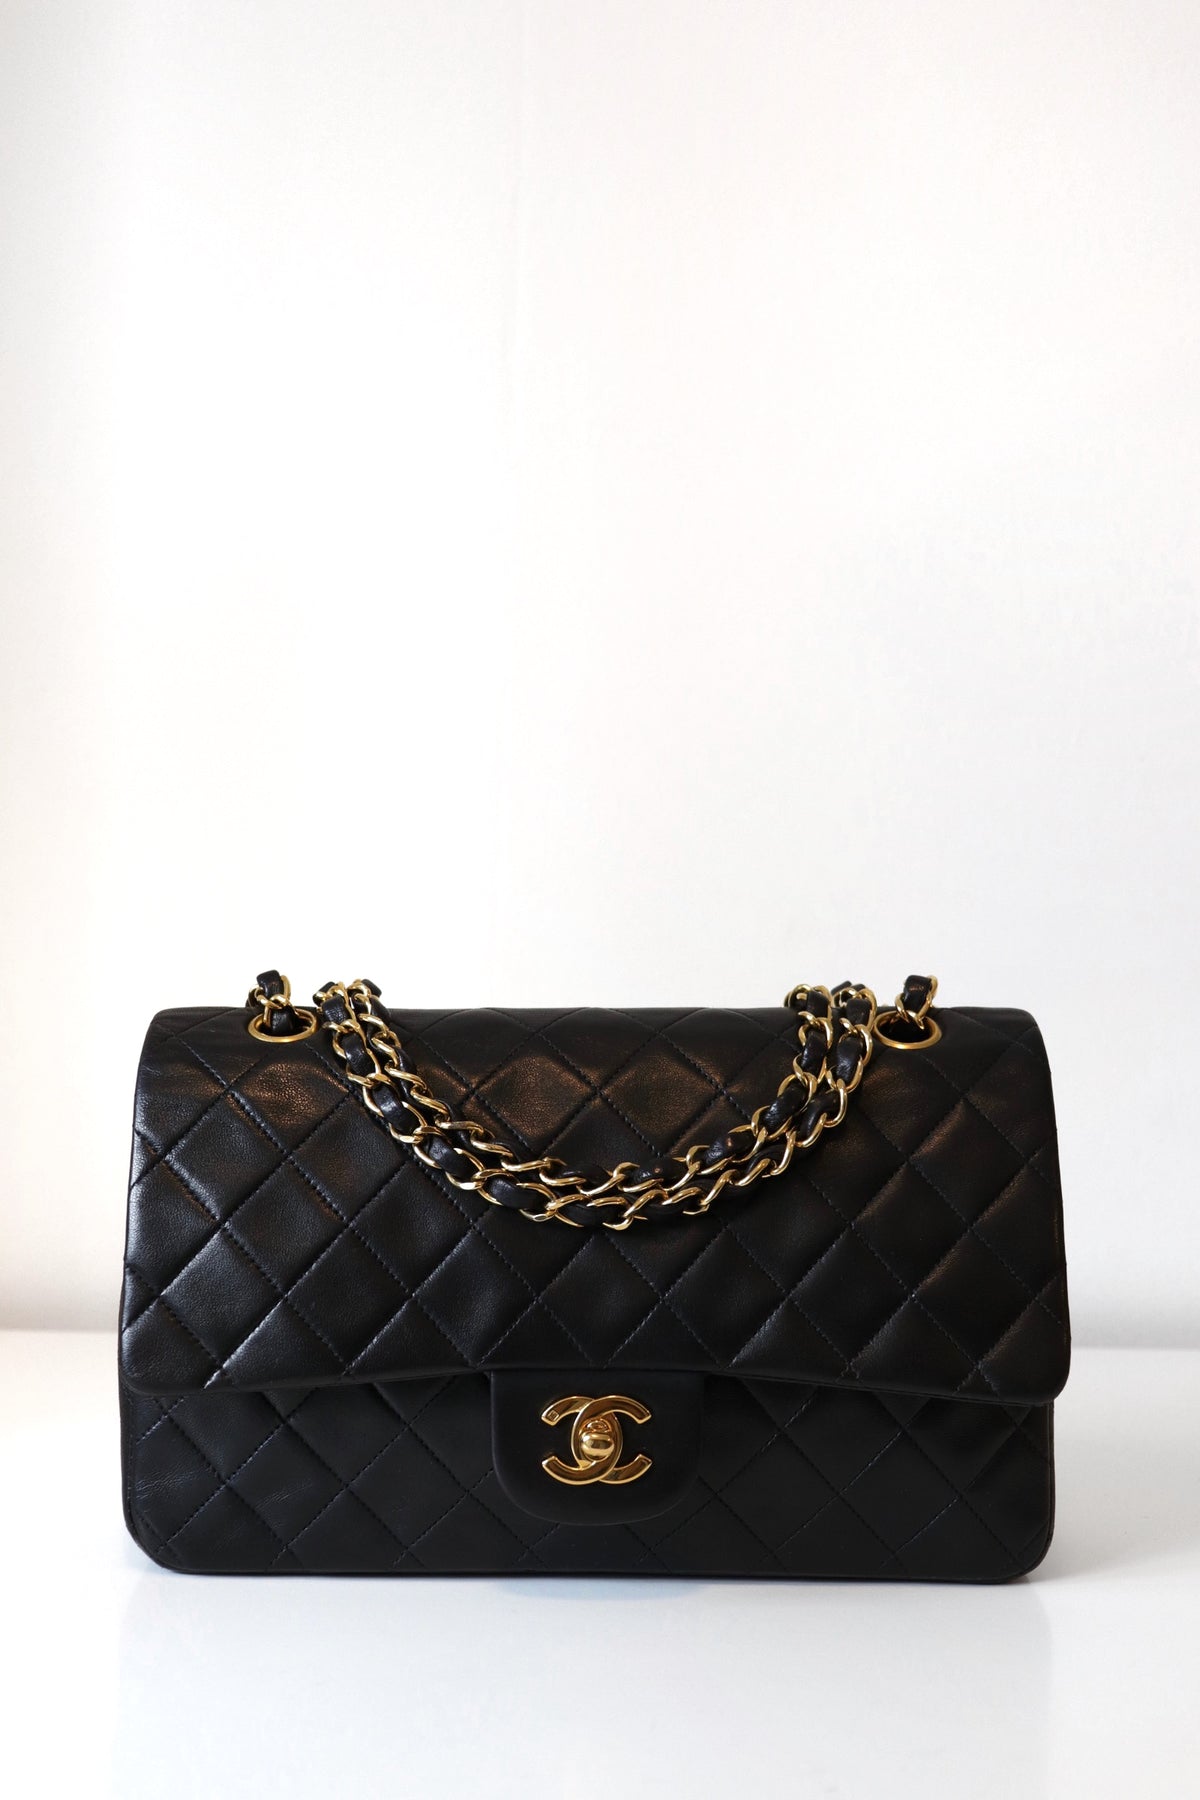 The Surprising Original Price of Favorite Chanel Items in Your